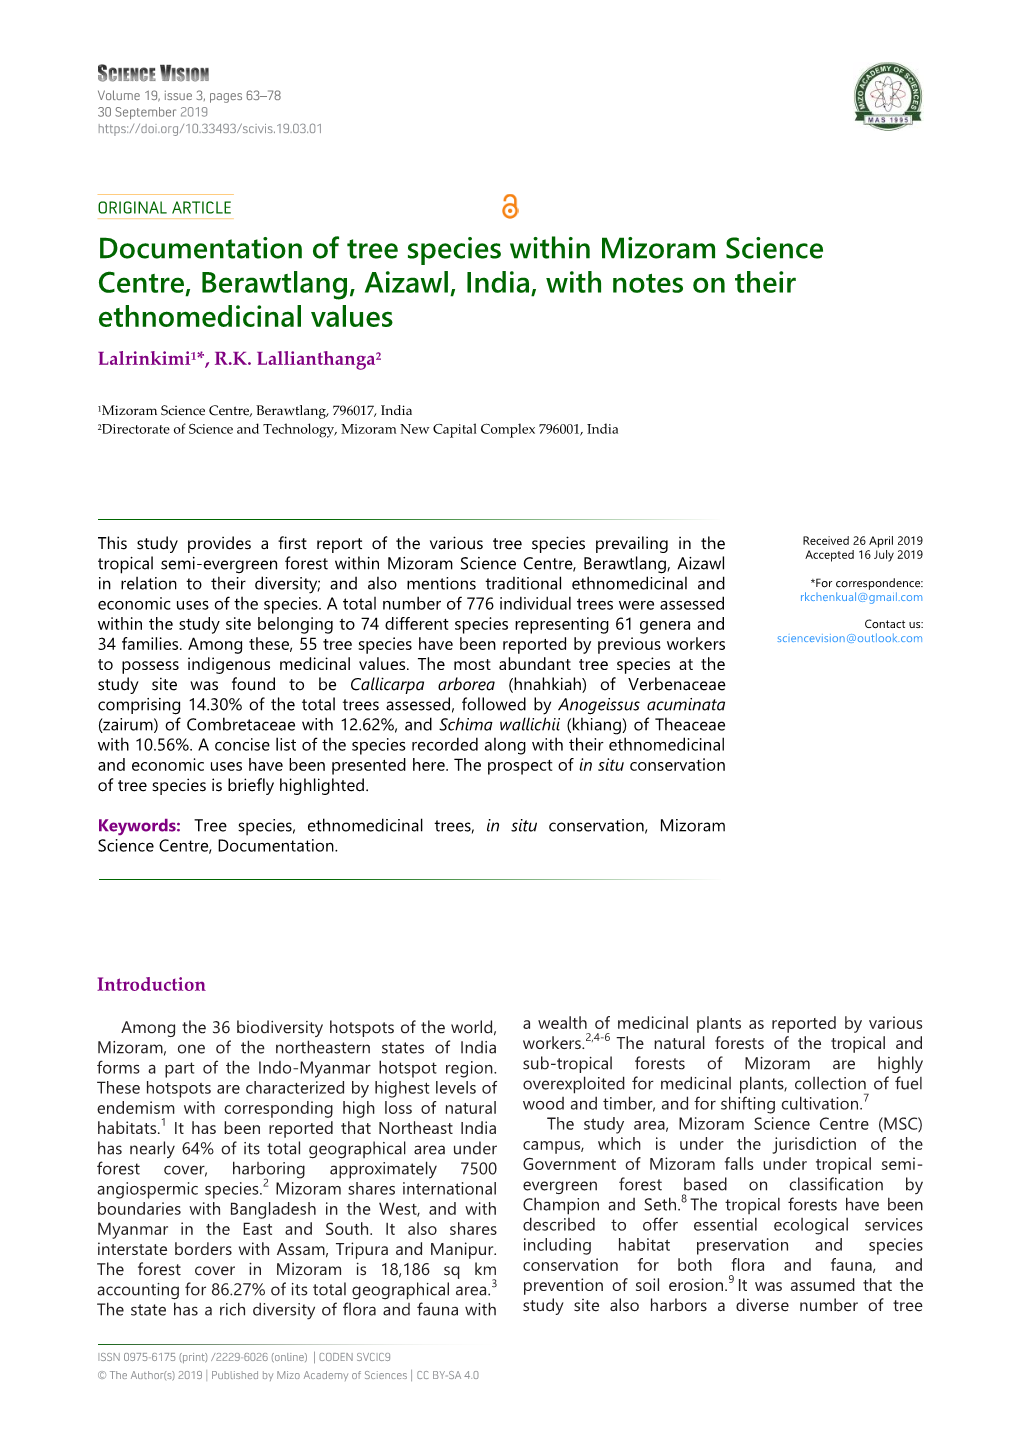 Documentation of Tree Species Within Mizoram Science Centre, Berawtlang, Aizawl, India, with Notes on Their Ethnomedicinal Values